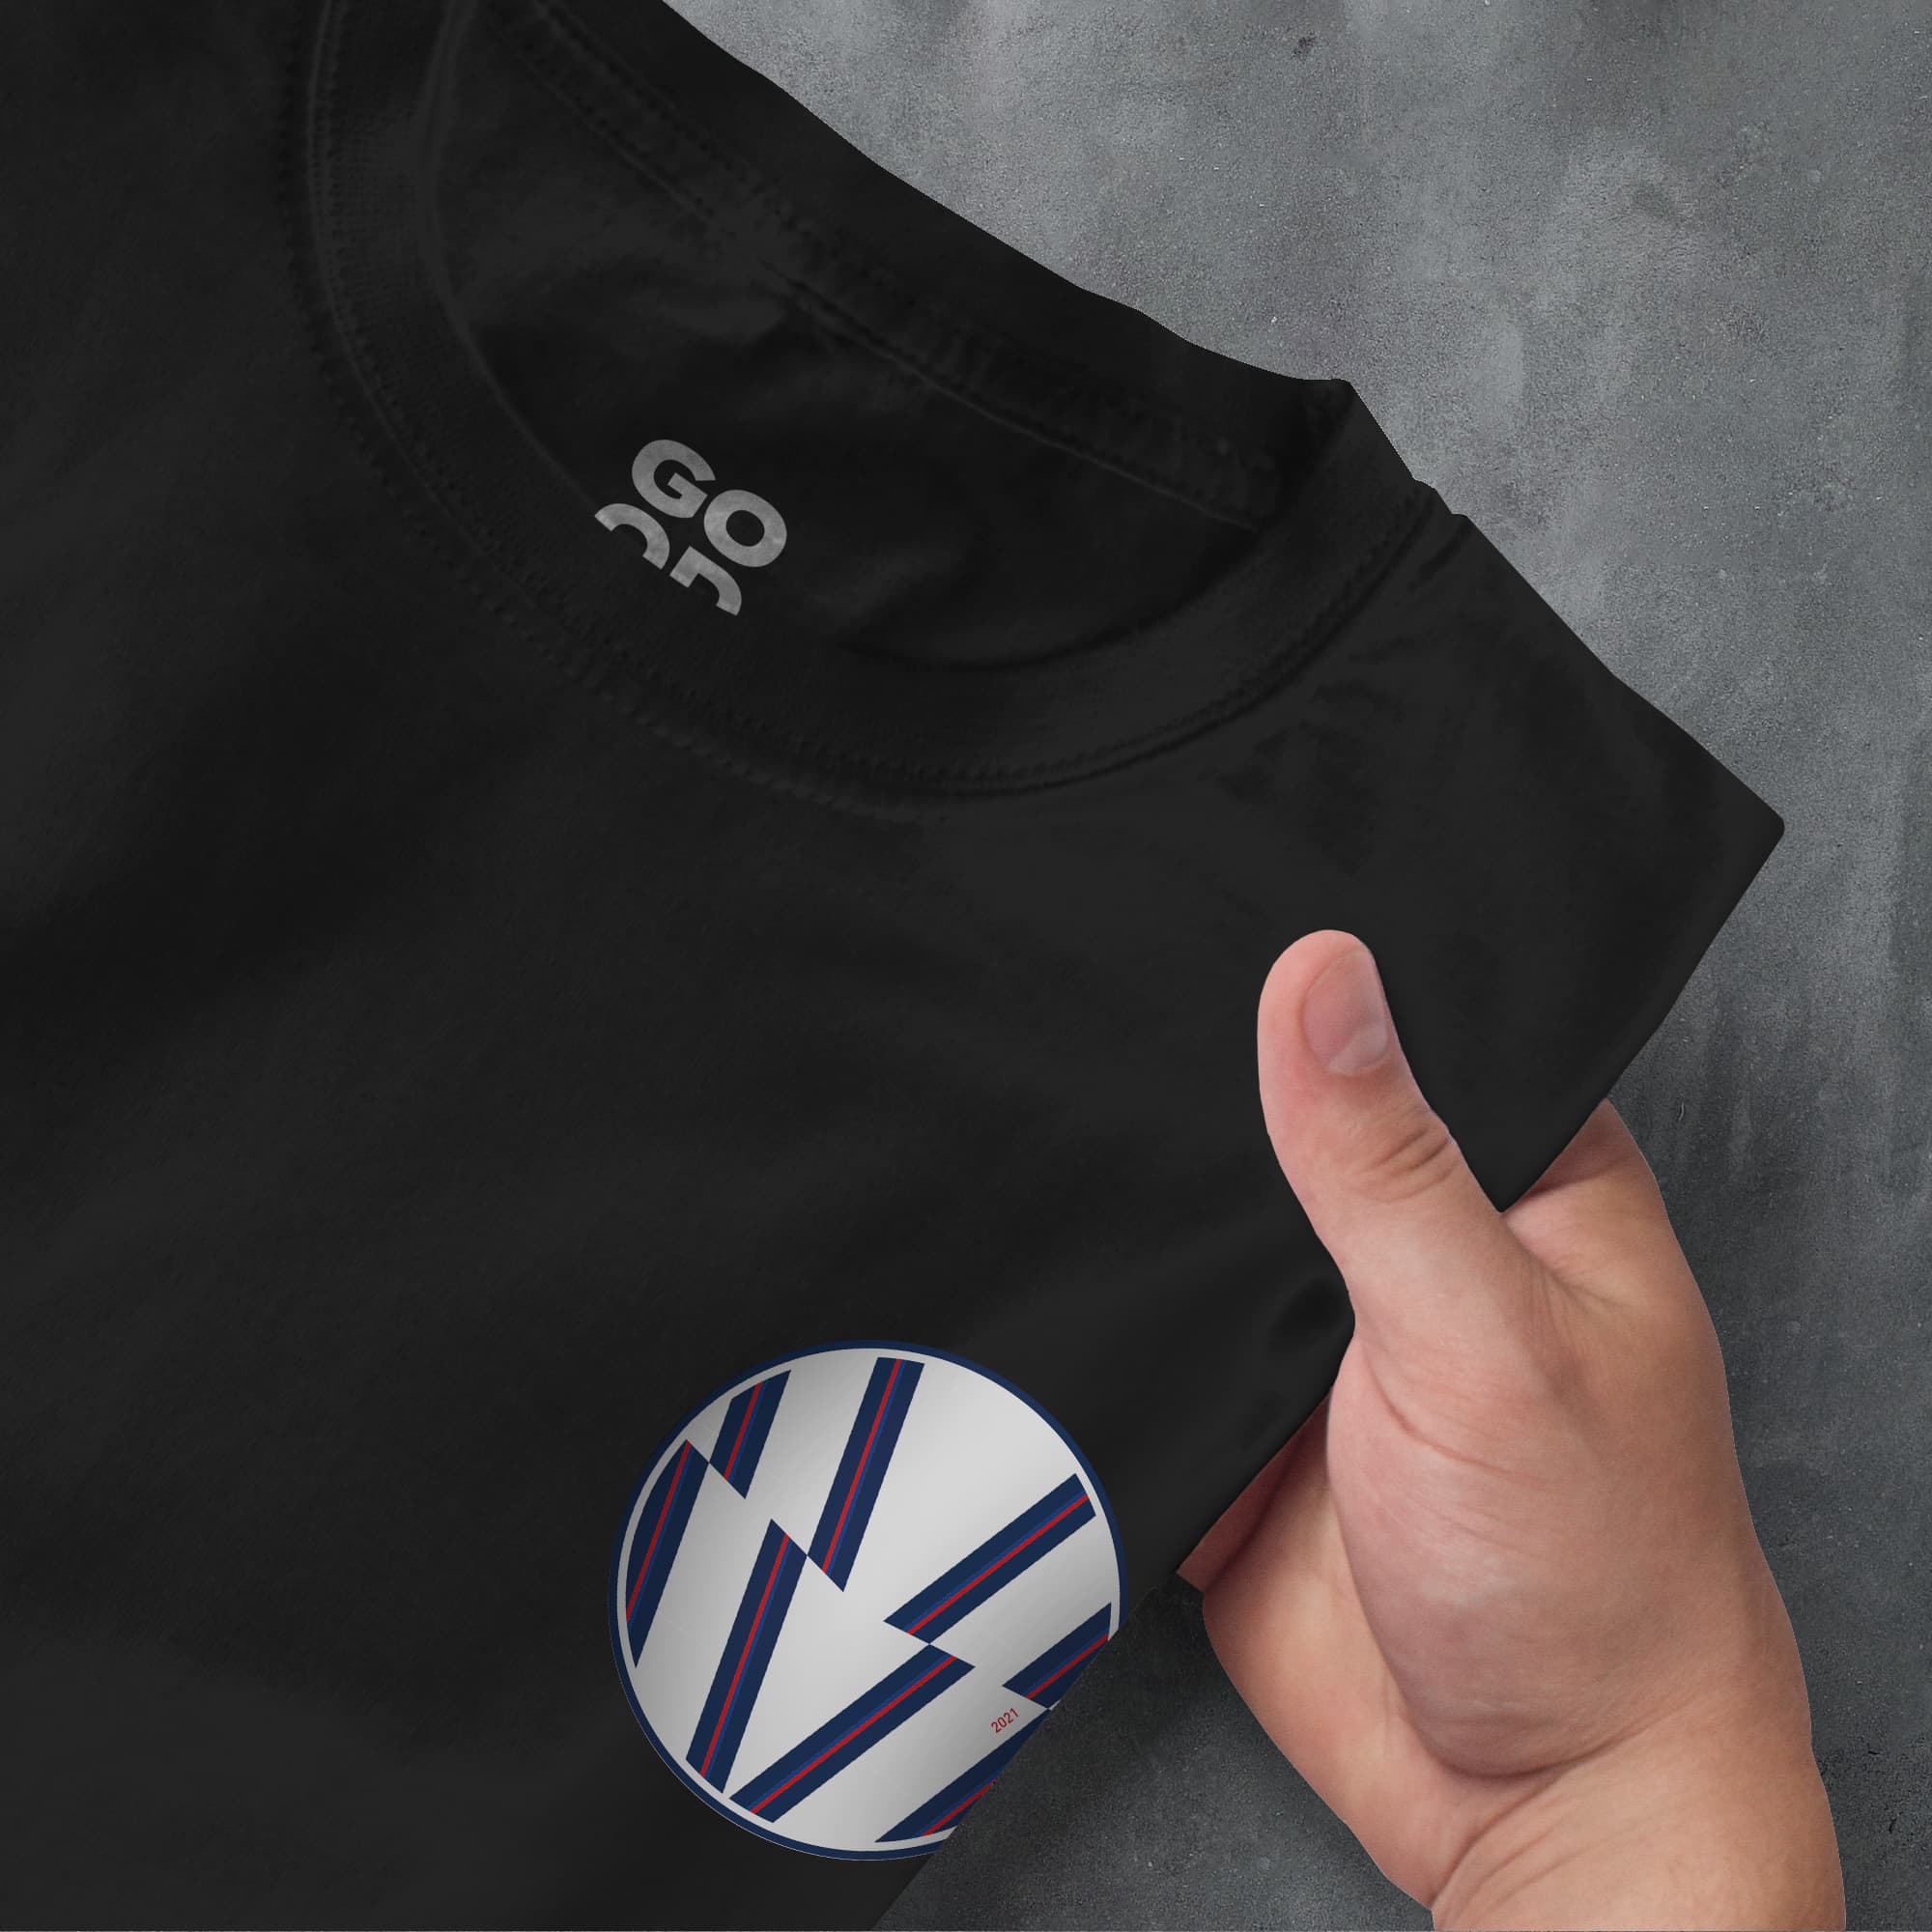 a person pointing at a black shirt with a white vw logo on it